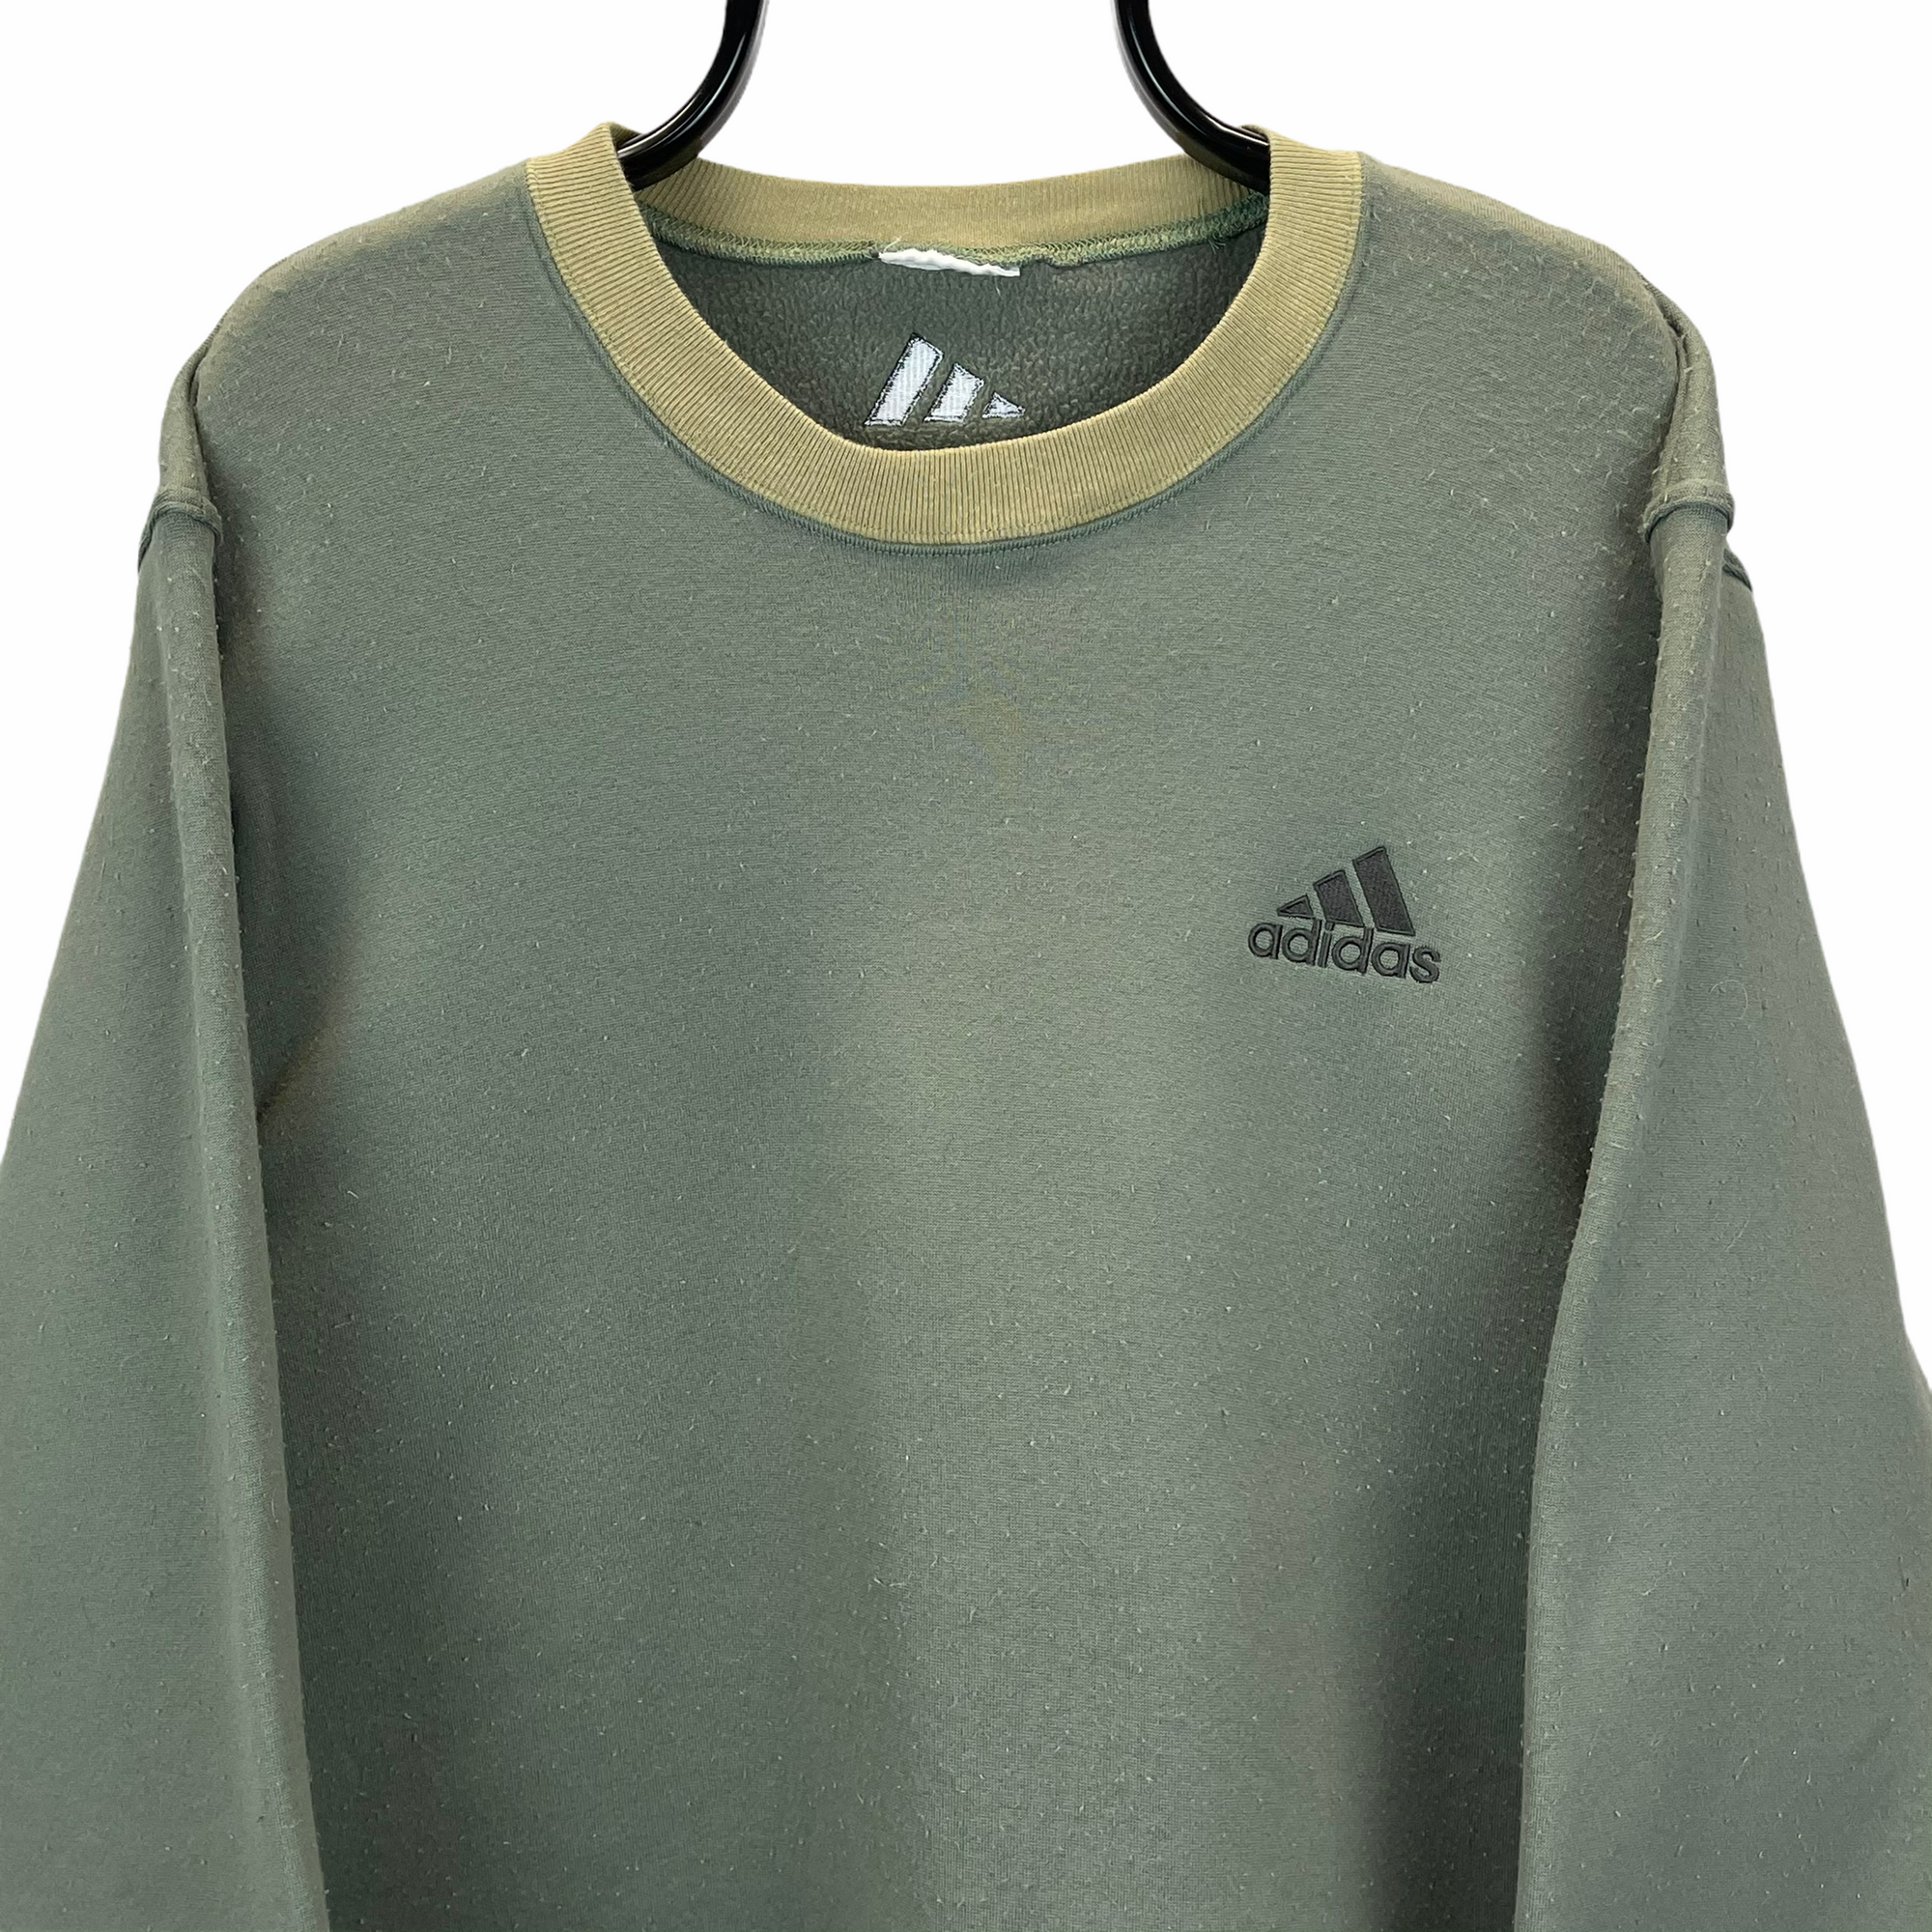 VINTAGE 90S ADIDAS EMBROIDERED SMALL LOGO SWEATSHIRT IN OLIVE & BEIGE - MEN'S LARGE/WOMEN'S XL